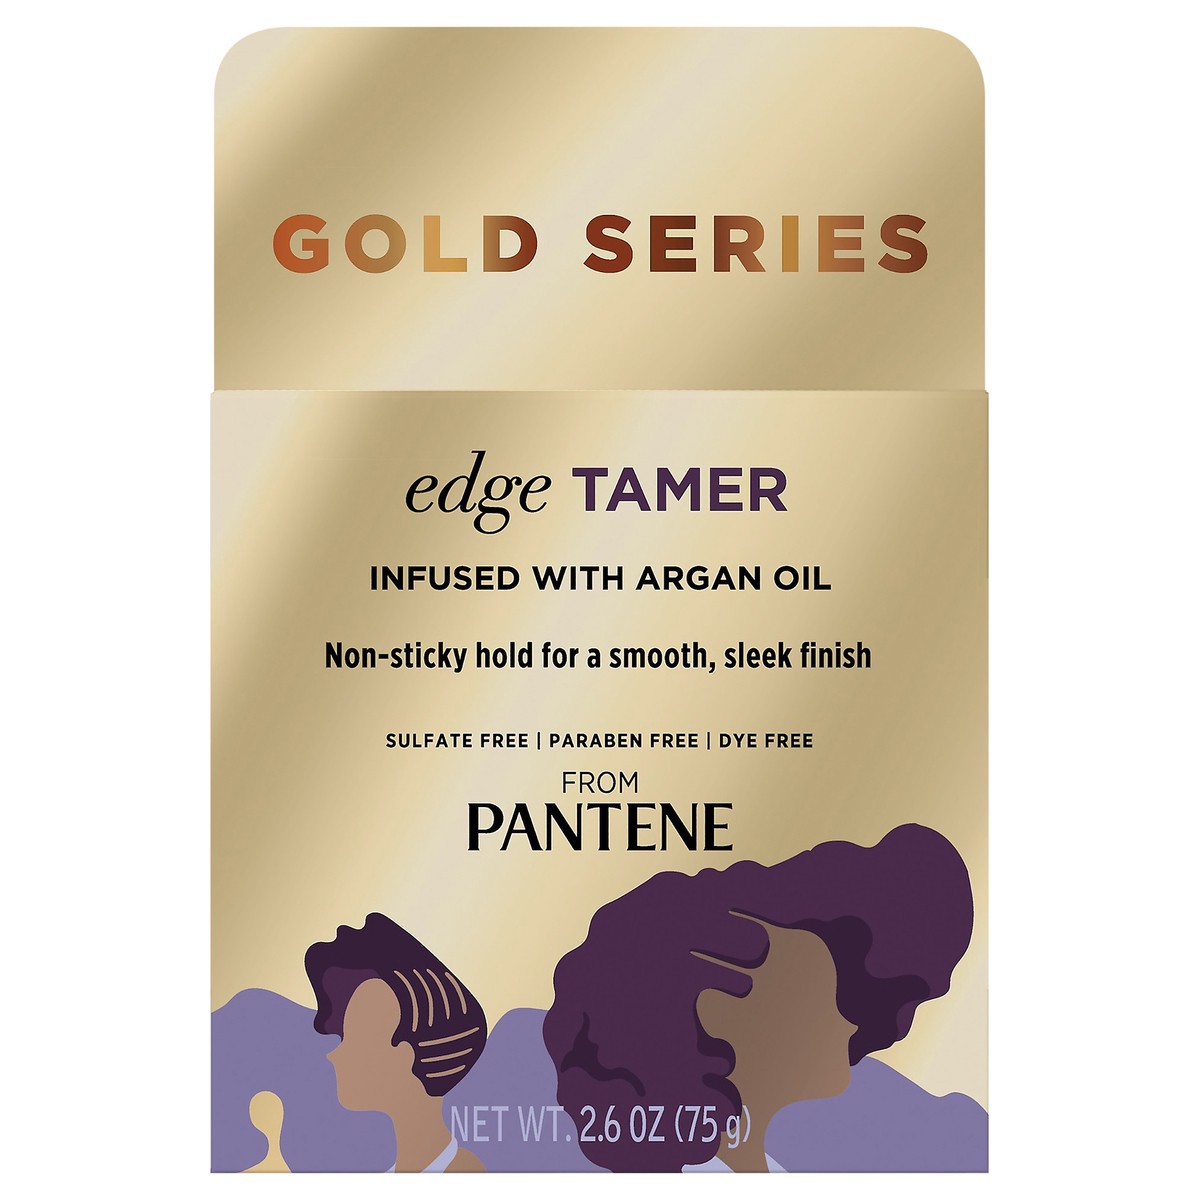 slide 1 of 11, Pantene Gold Series from Pantene Sulfate-Free Edge Tamer Treatment with Argan Oil, Non-Sticky Edge Control, 2.6 fl oz, 2.6 oz